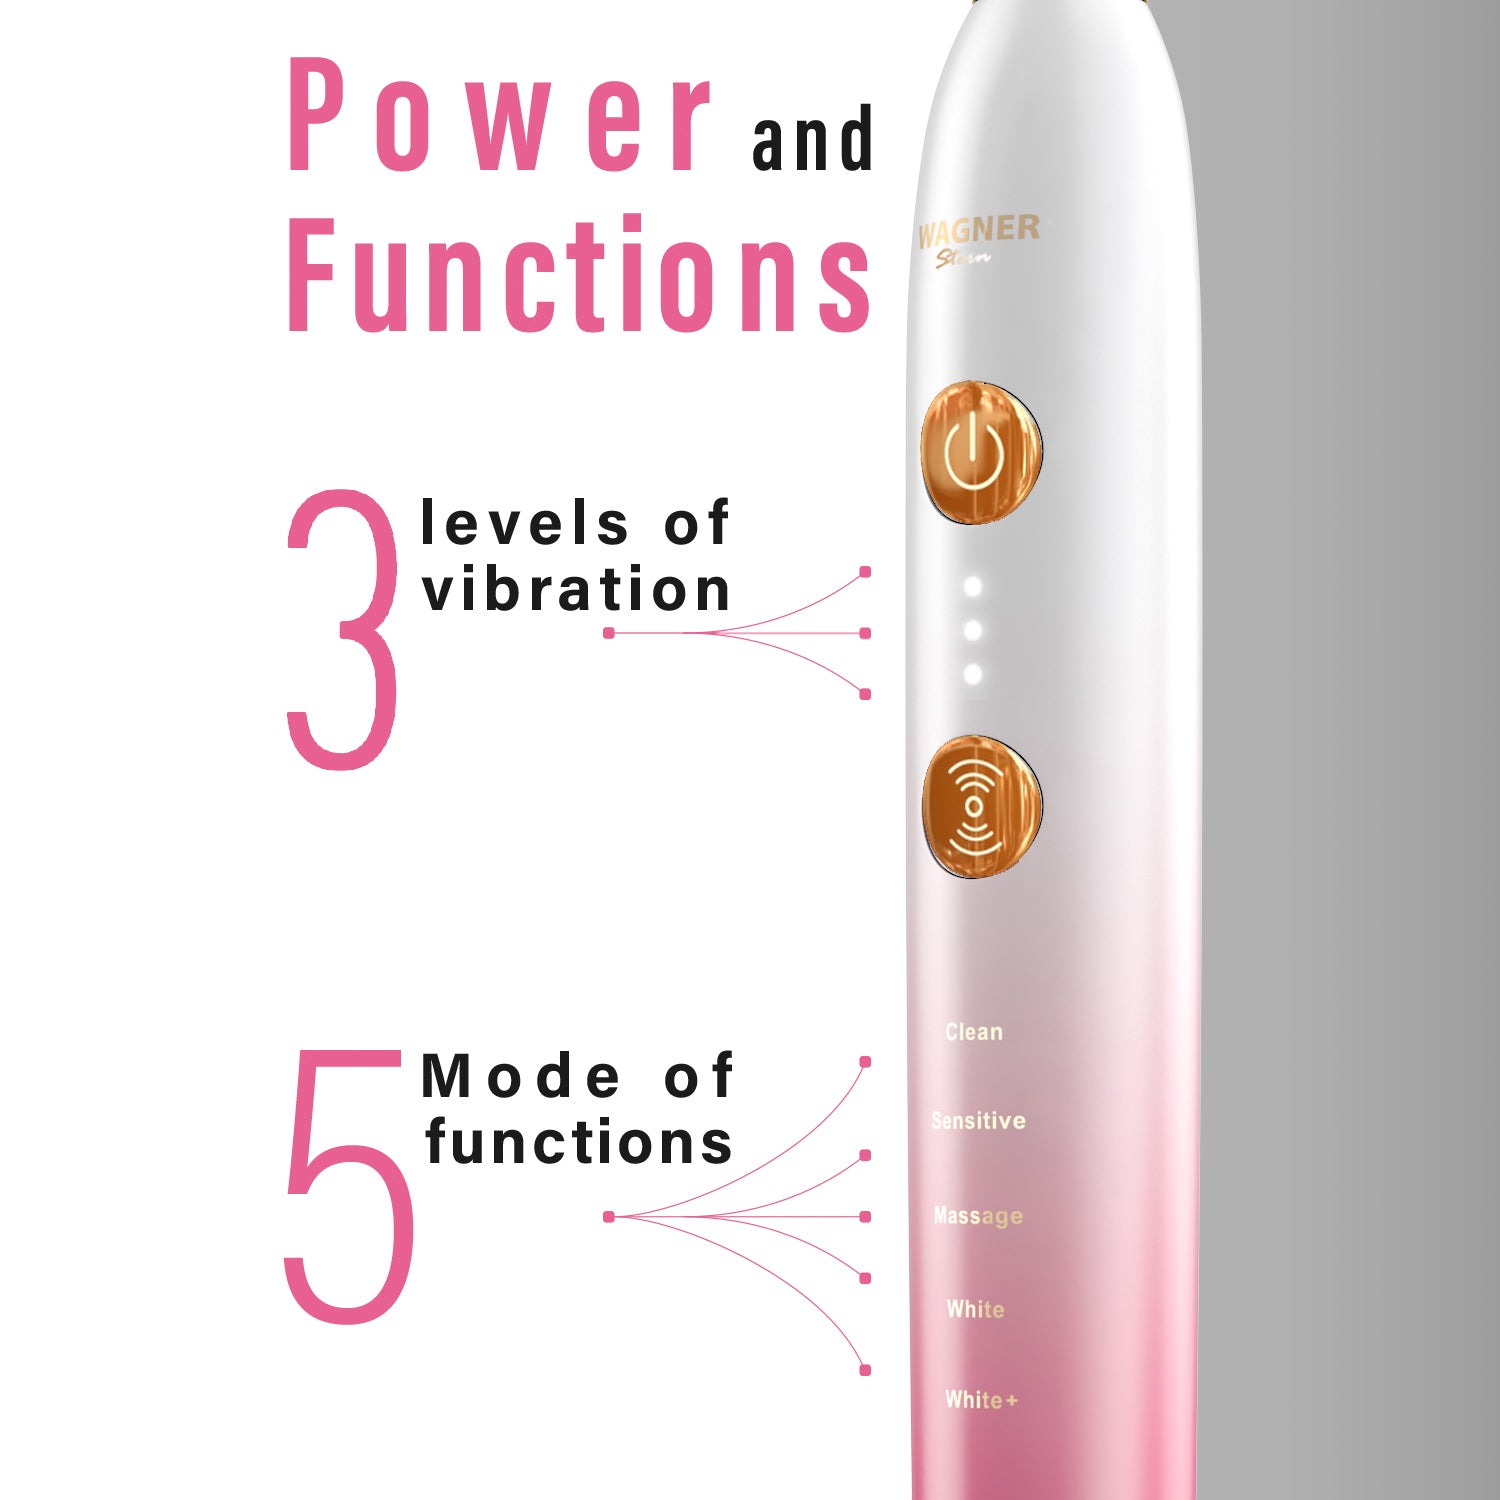 Wagner & Stern WHITEN+ Edition. Smart Electric Toothbrush with Pressure Sensor. 5 Brushing Modes and 3 Intensity Levels, 8 Dupont Bristles, Premium Travel Case.